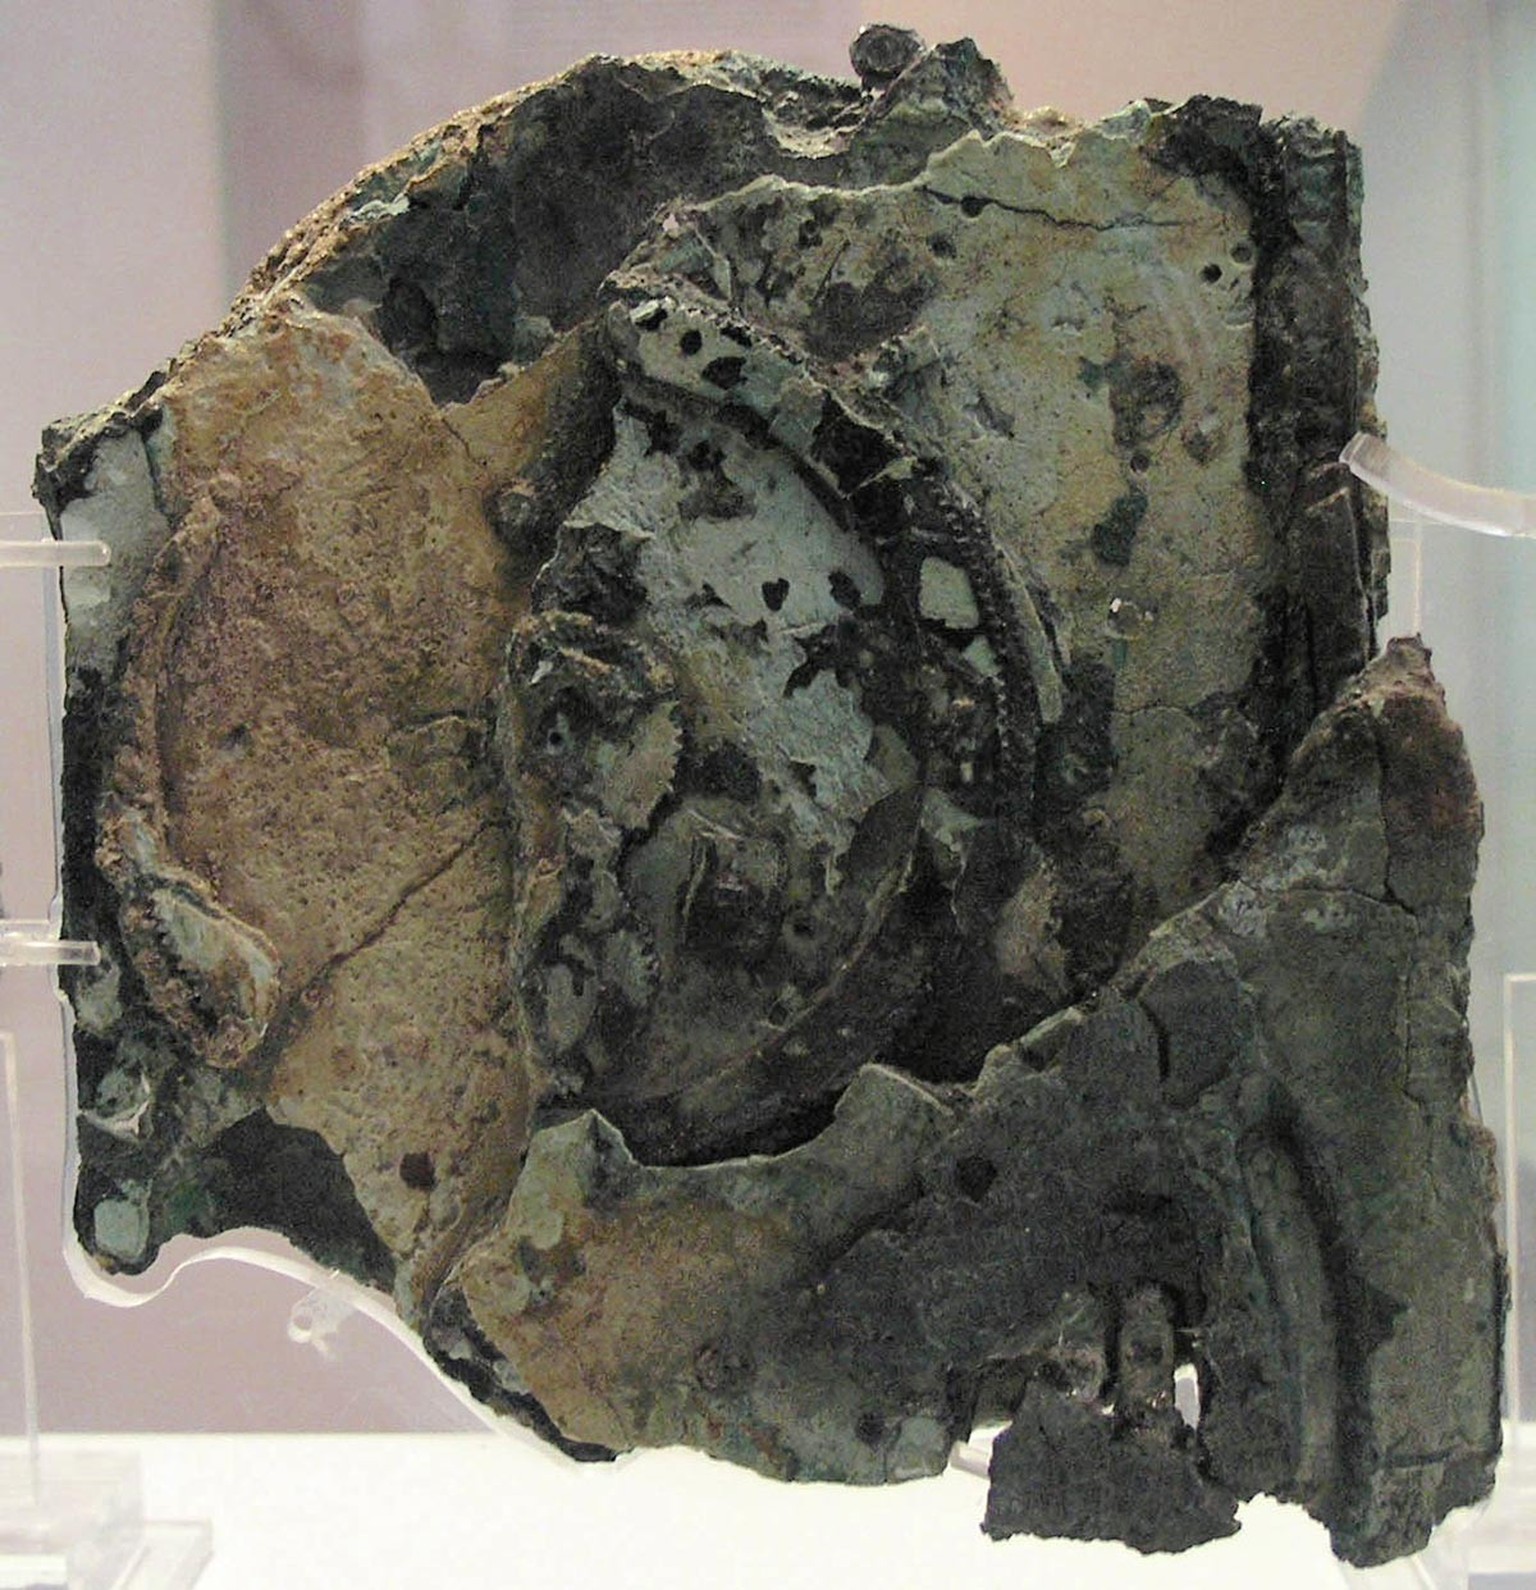 The ancient Antikythera mechanism has been recreated several times to date, including one in Switzerland.  https://de.wikipedia.org/wiki/Mechanismus_von_Antikythera#/media/File:Fragments_of_the_Antikyt...